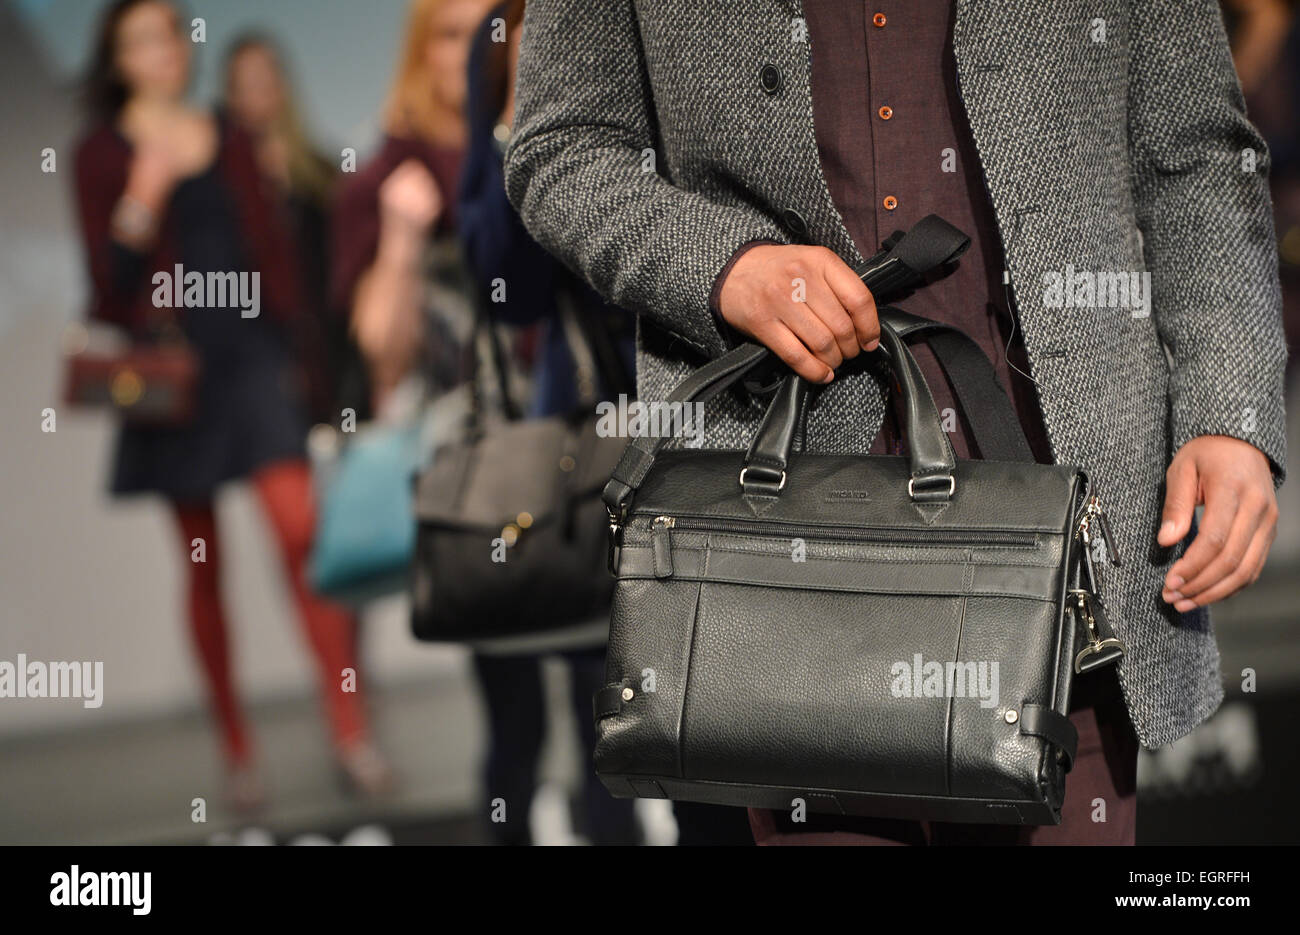 Offenbach, Germany. 27th Feb, 2015. A model presents a man's bag from  Picard for the fall/winter 2015/16 season at the ILM Winter Styles Trend  Show in Offenbach, Germany, 27 February 2015. Until